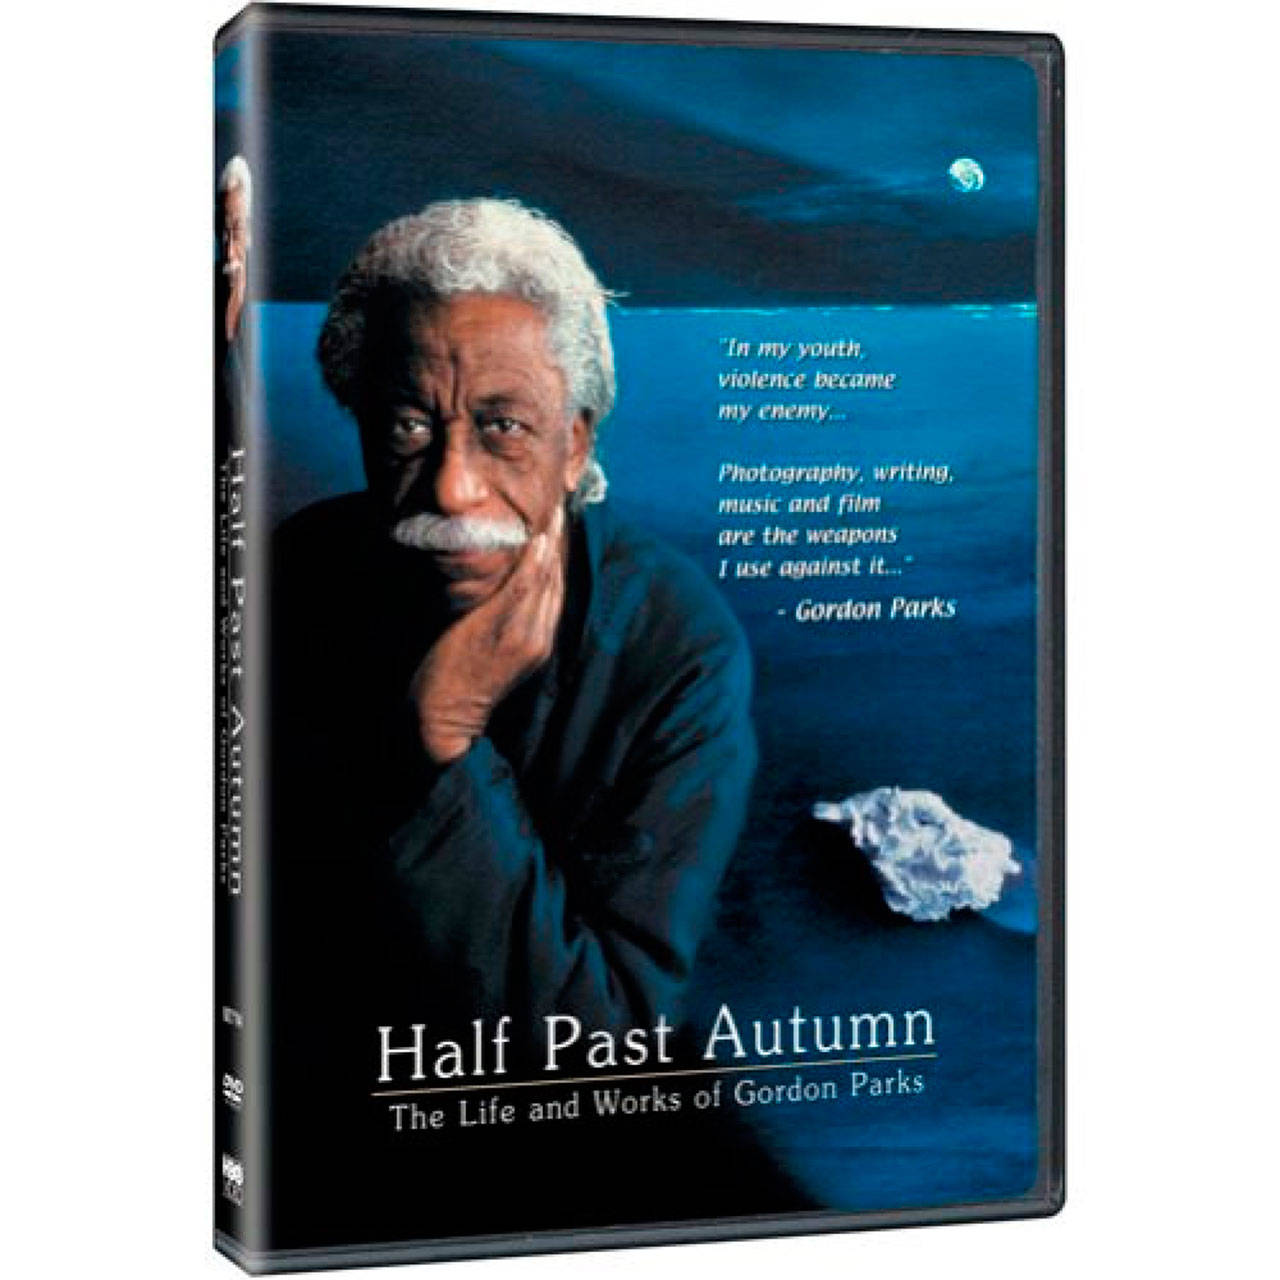 Image courtesy of HBO Studios - The life and works of Gordon Parks will be explored via the screening of the lauded documentary “Half Past Autumn,” and a short presentation by Rob Wagoner, at the upcoming Bainbridge Island Photo Club movie night event at 7 p.m. Wednesday, Sept. 27 at the senior center in Waterfront Park.